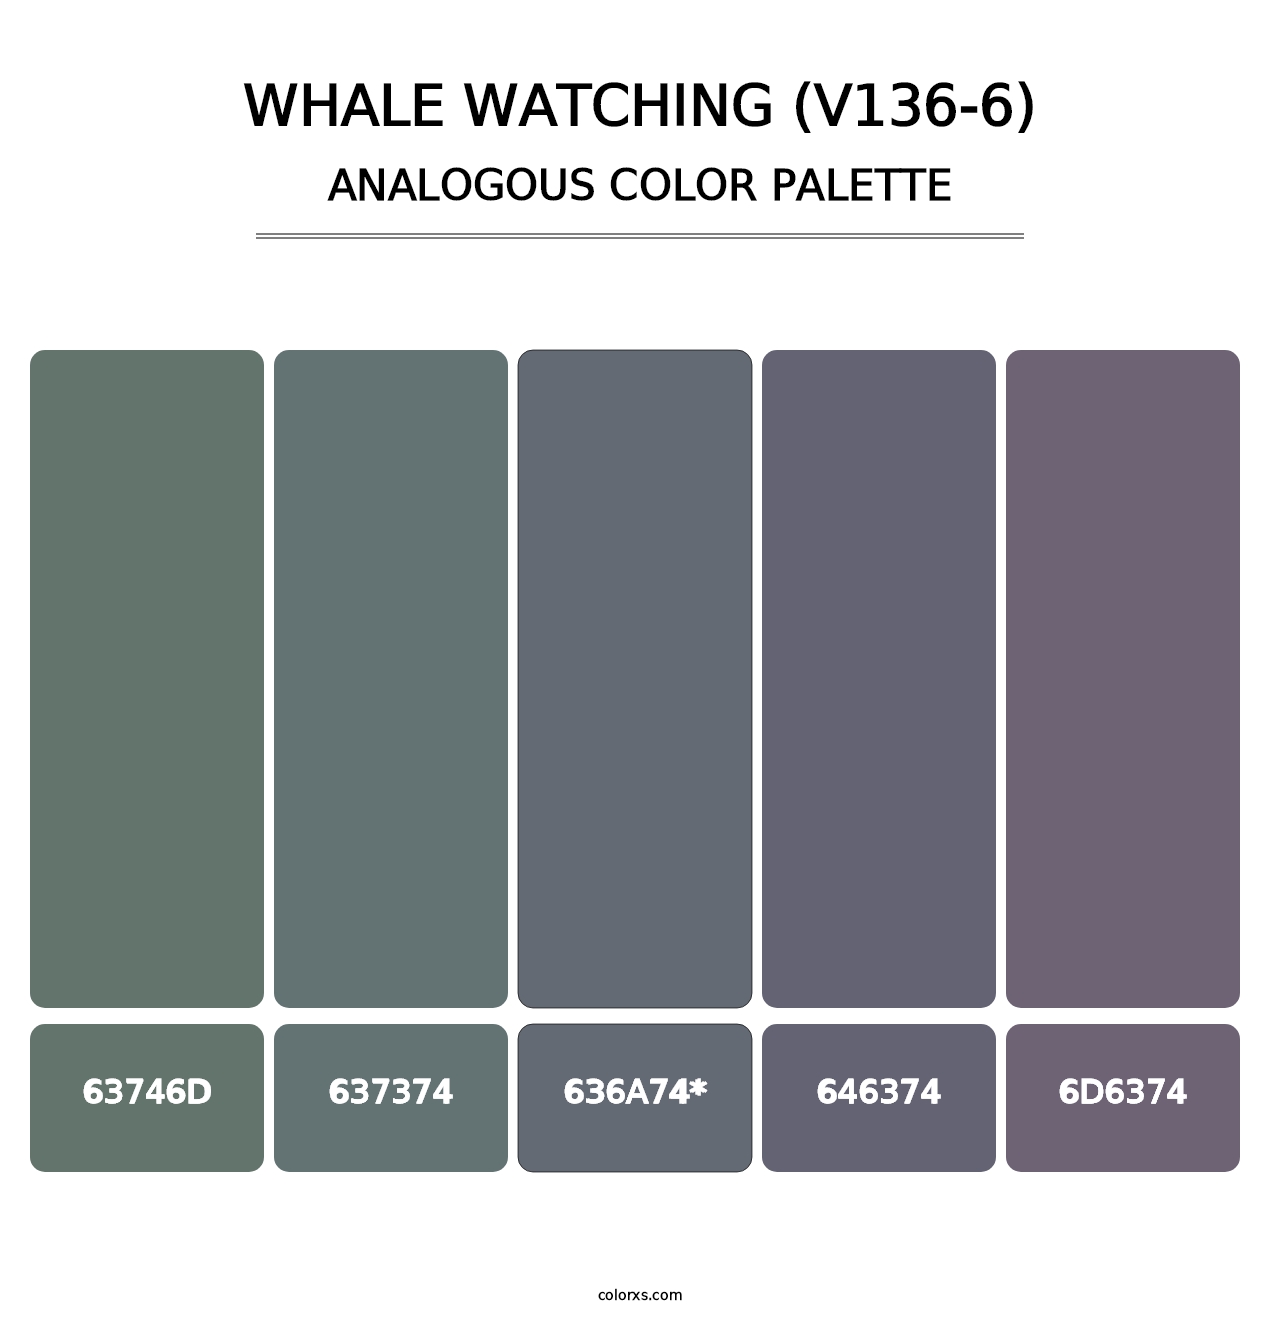 Whale Watching (V136-6) - Analogous Color Palette